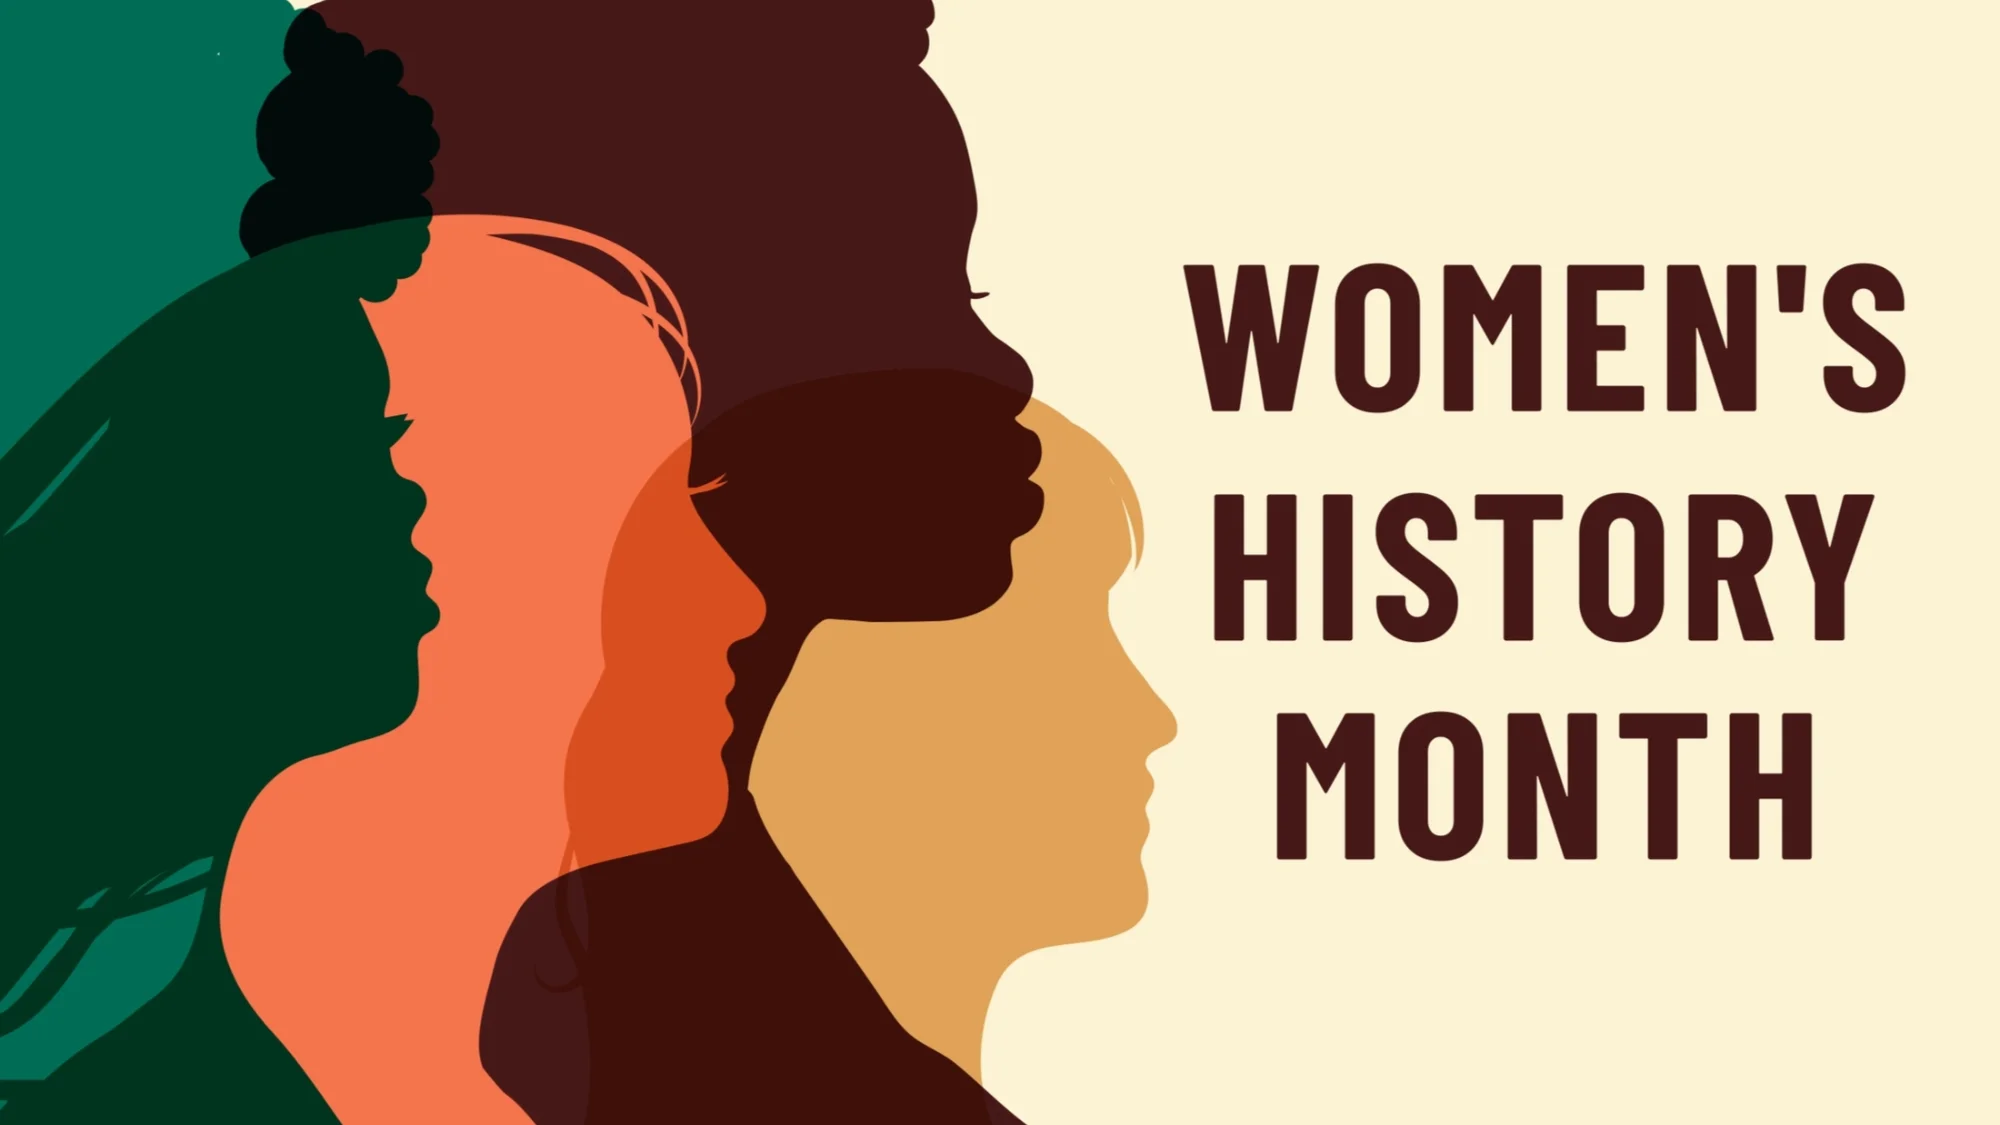 Student organization share what Women’s History means to Them